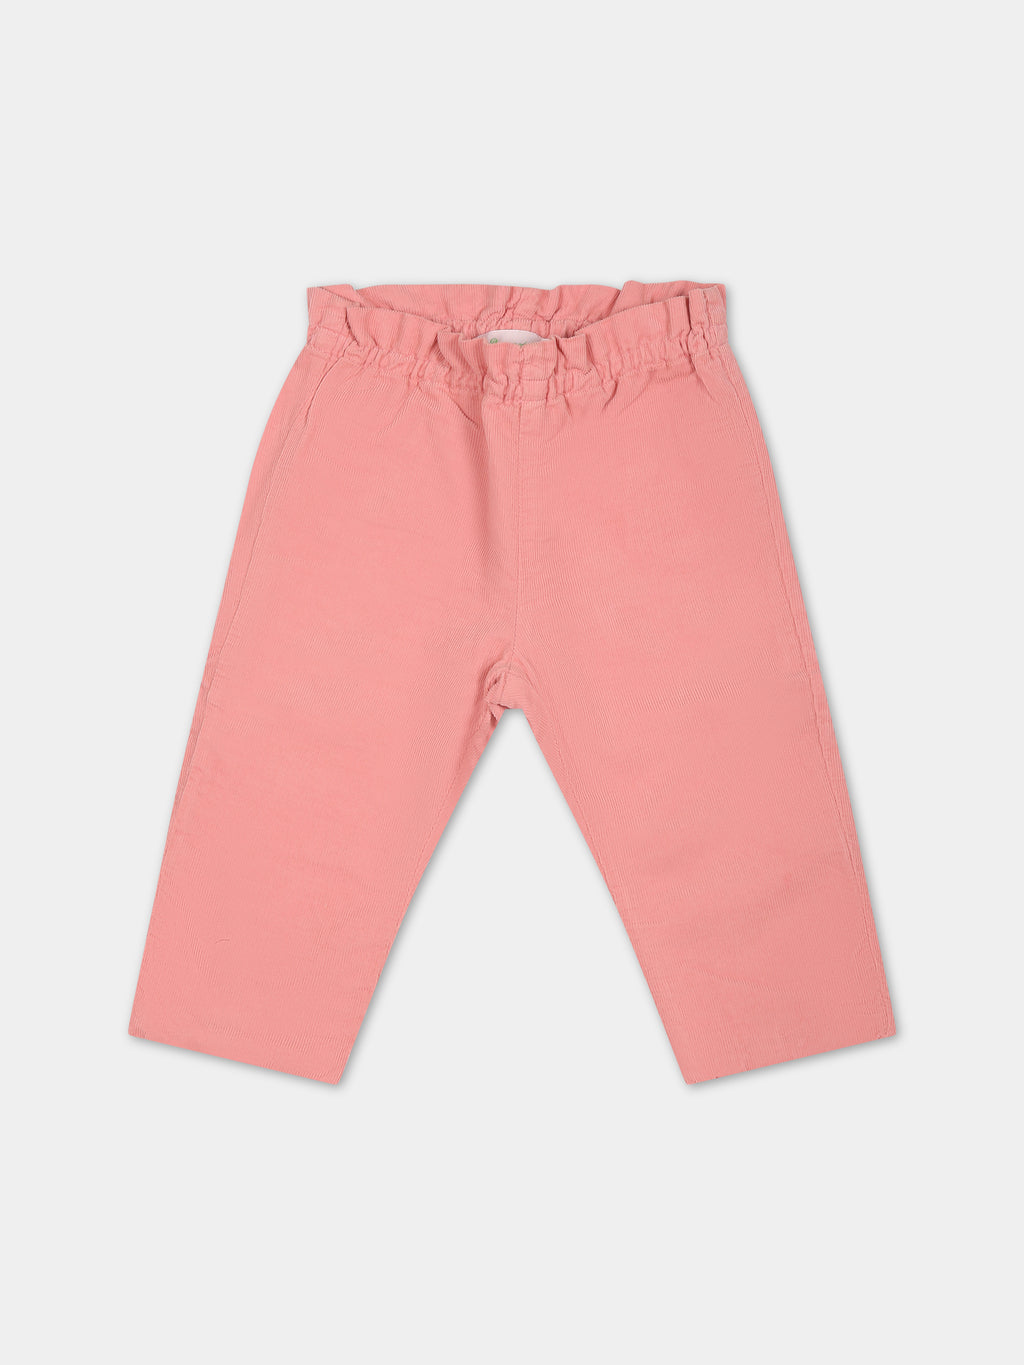 Pink trousers for baby girl with cherries